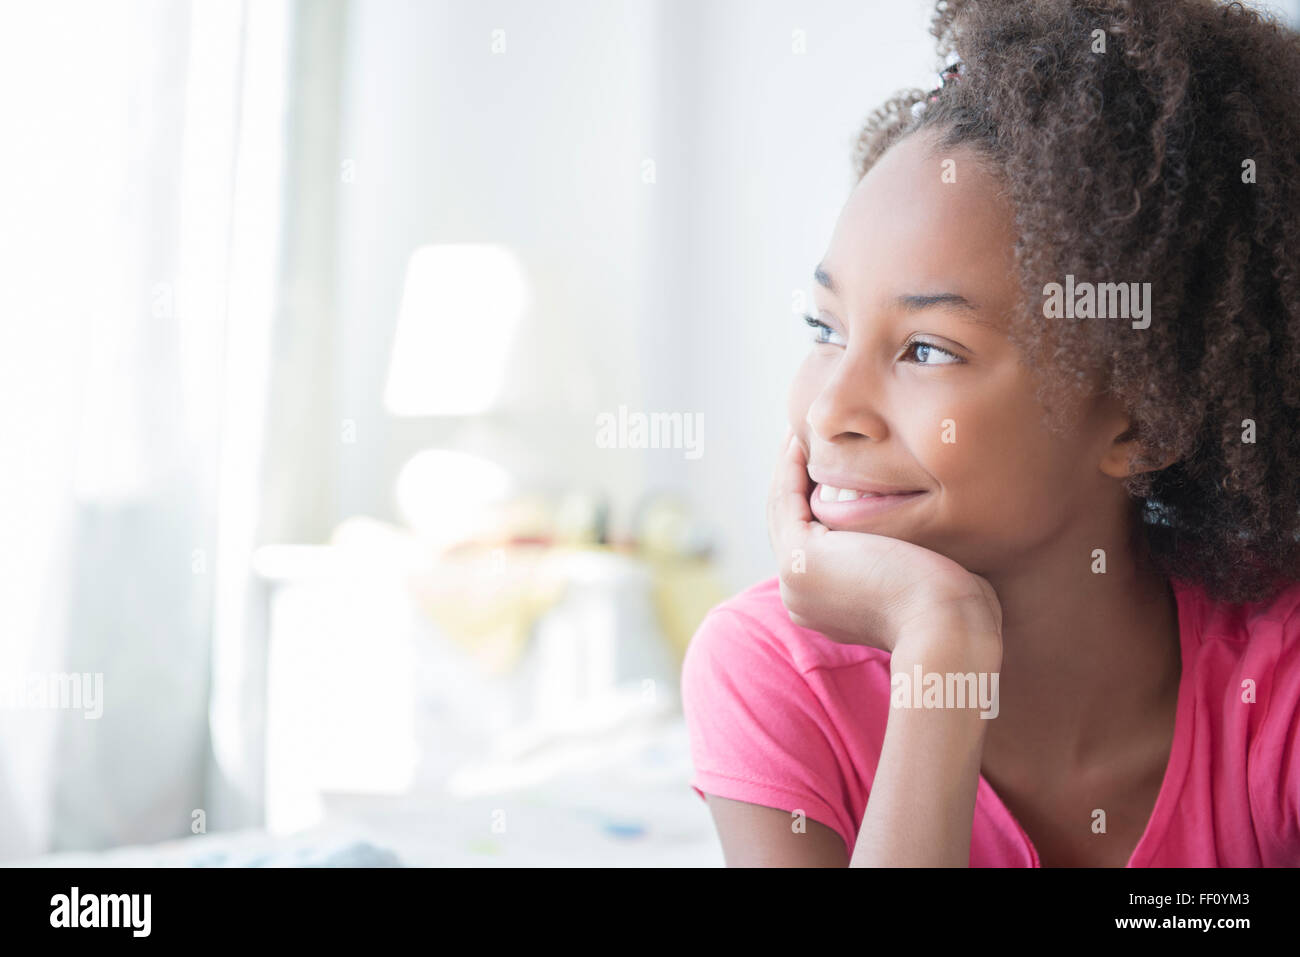 Mixed Race woman smiling indoors Banque D'Images